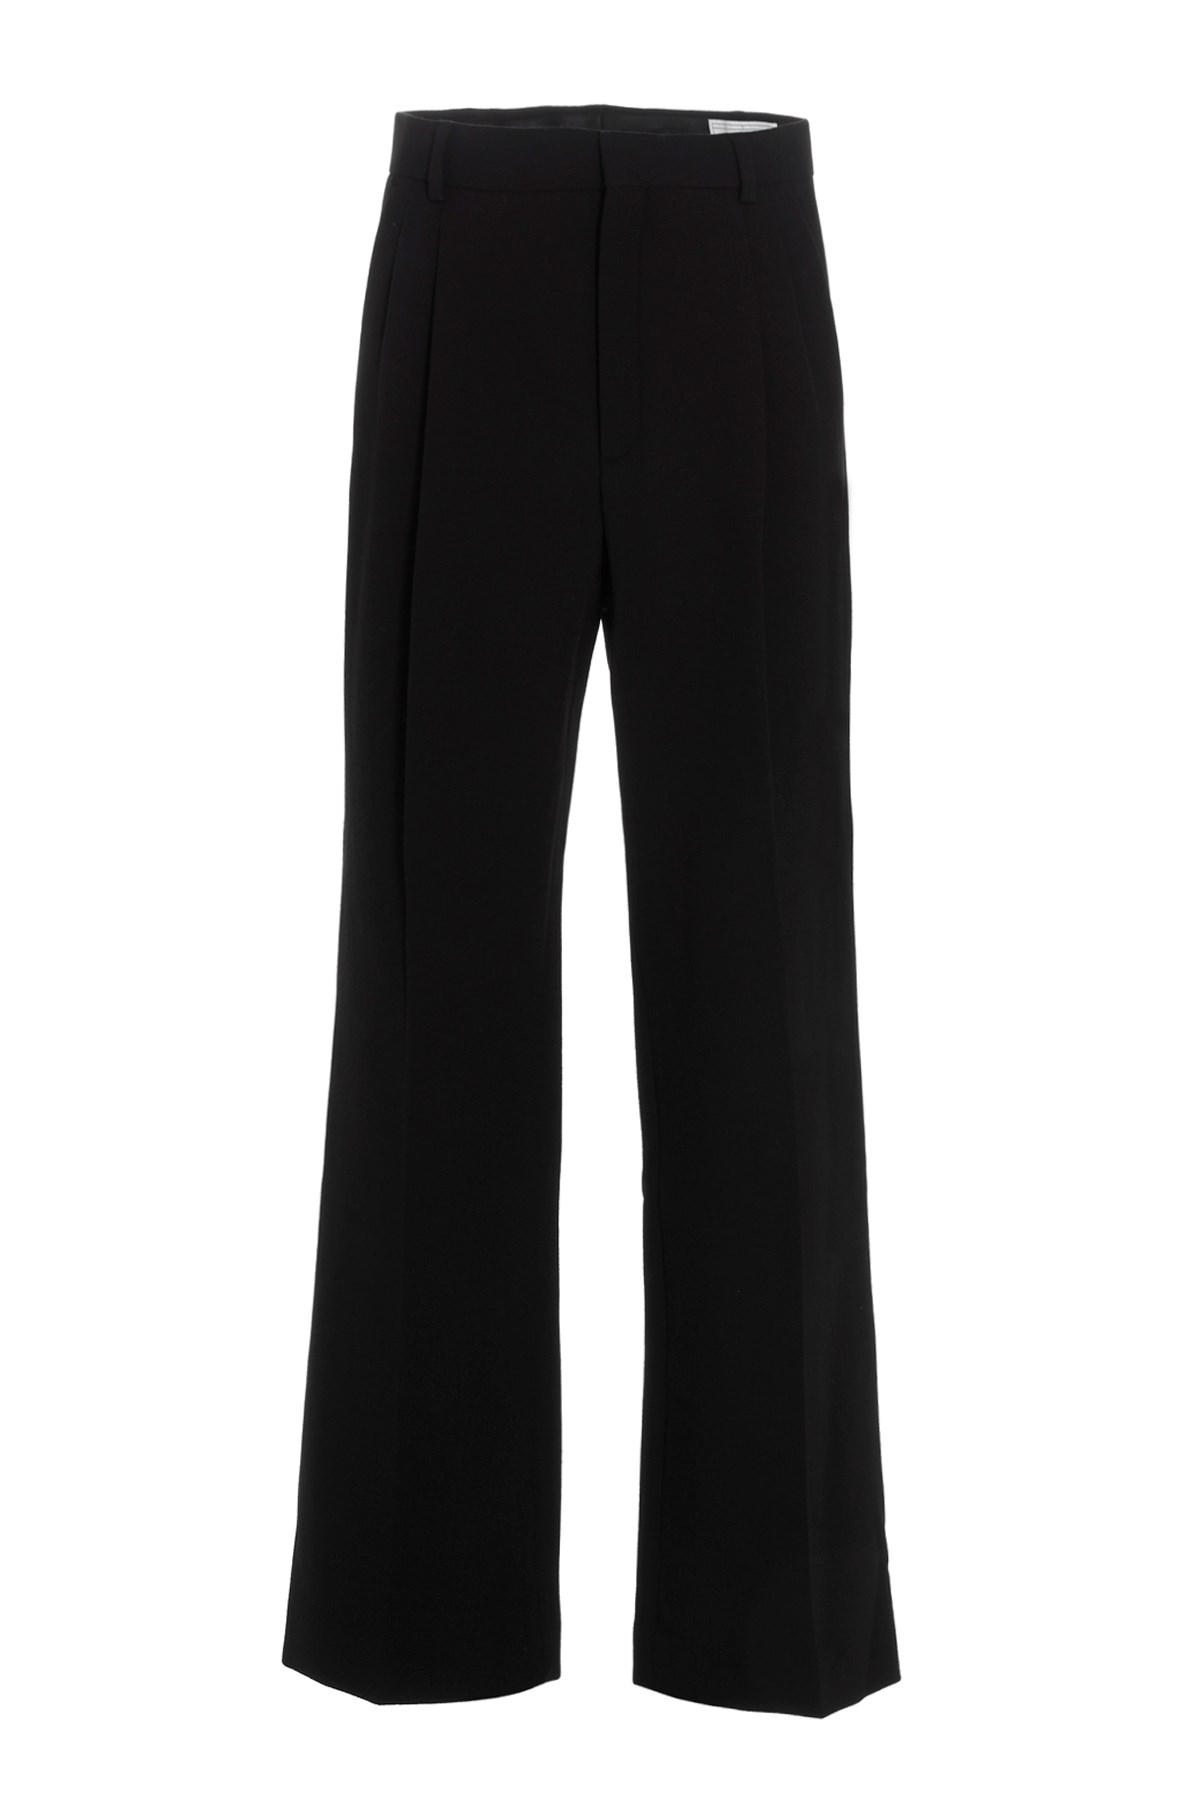 CASABLANCA Trousers With Front Pleats